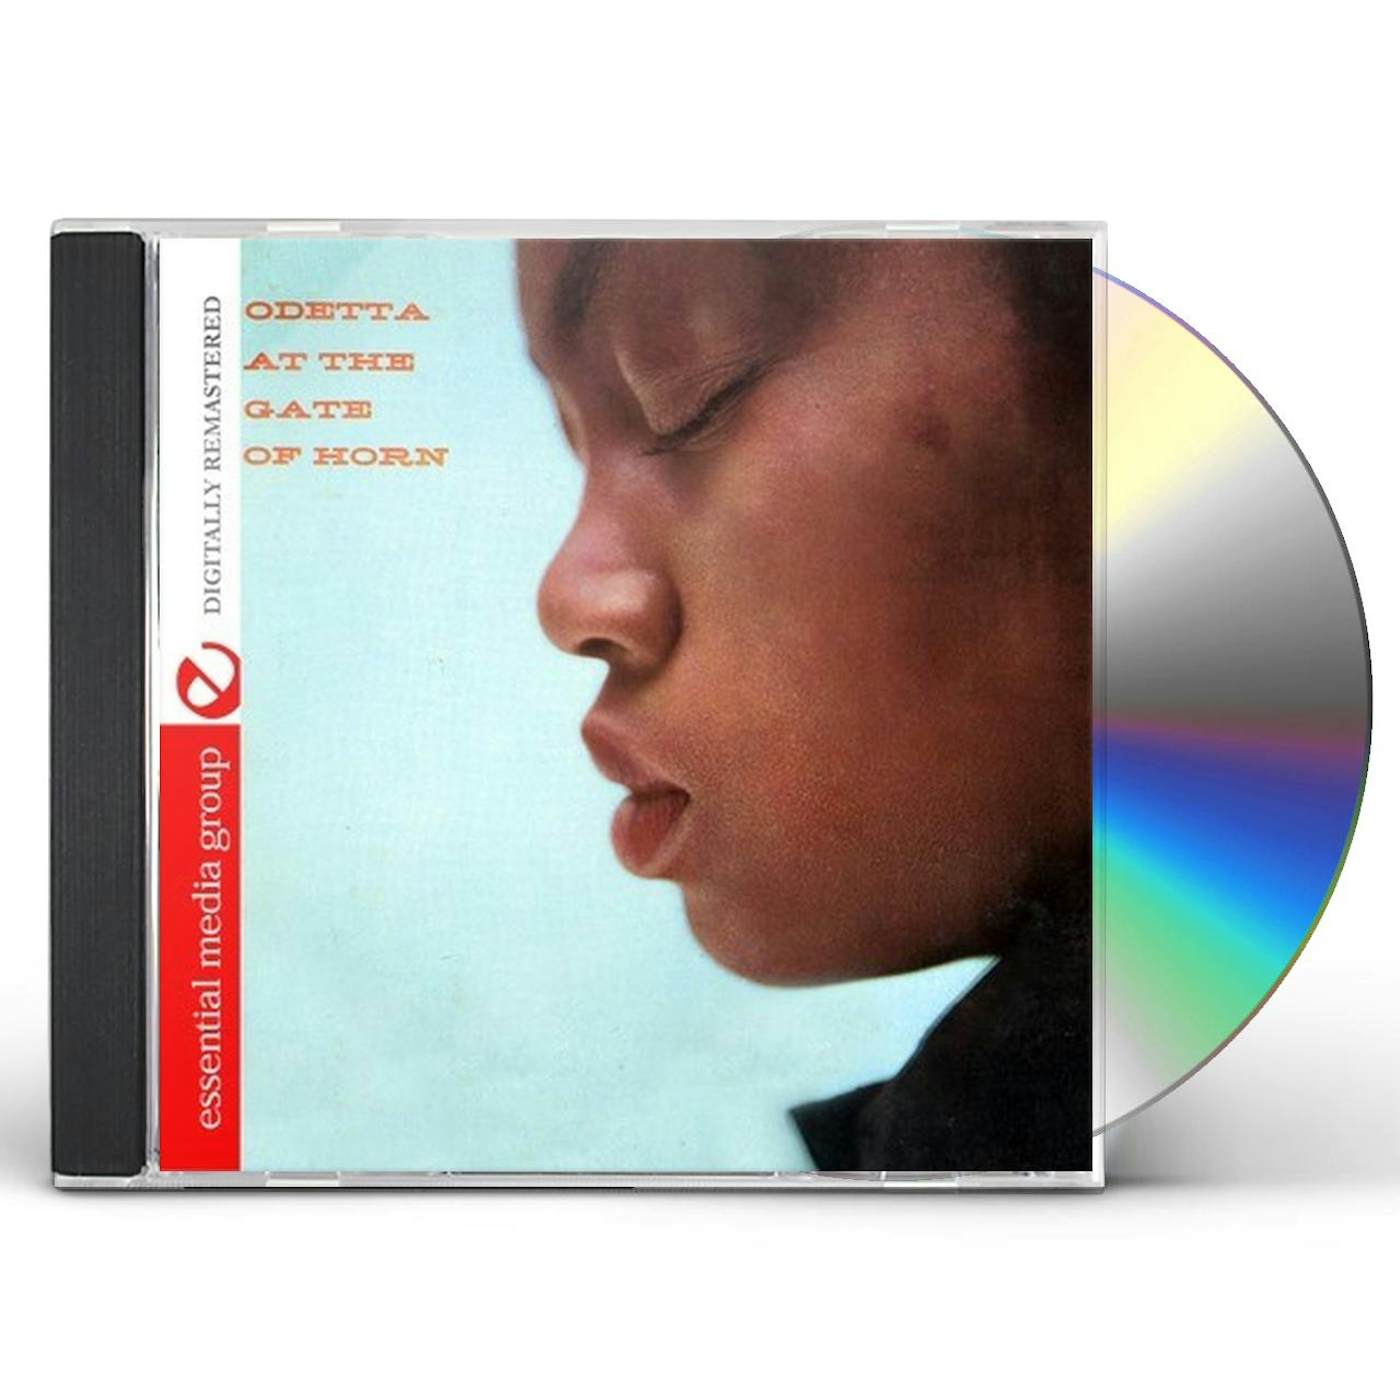 Odetta AT THE GATE OF HORN CD